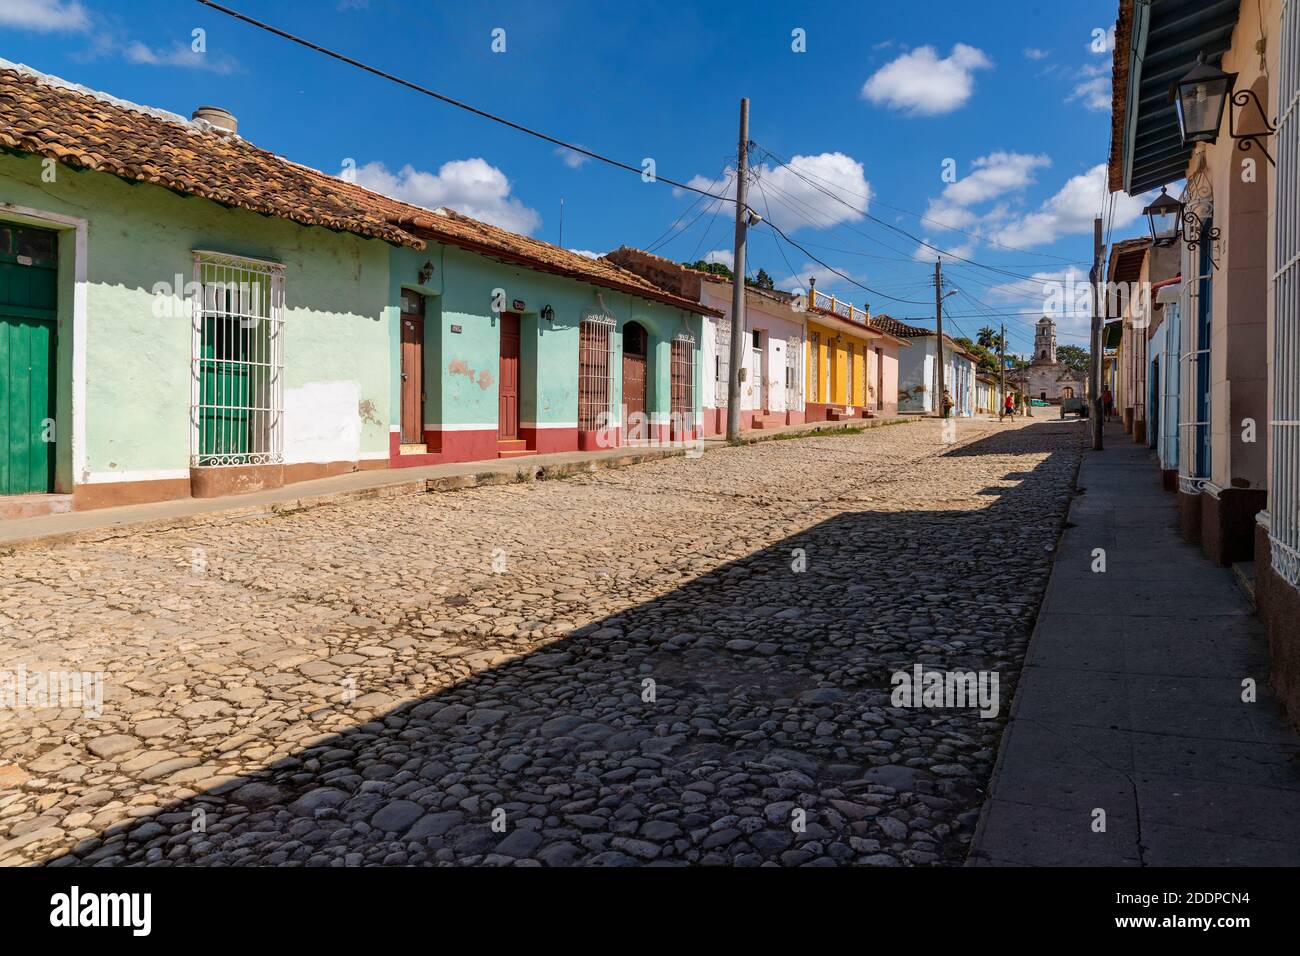 Trinidad is one of the most tourist attractive city in Cuba. There are very nice neighborhoods in the city. Stock Photo